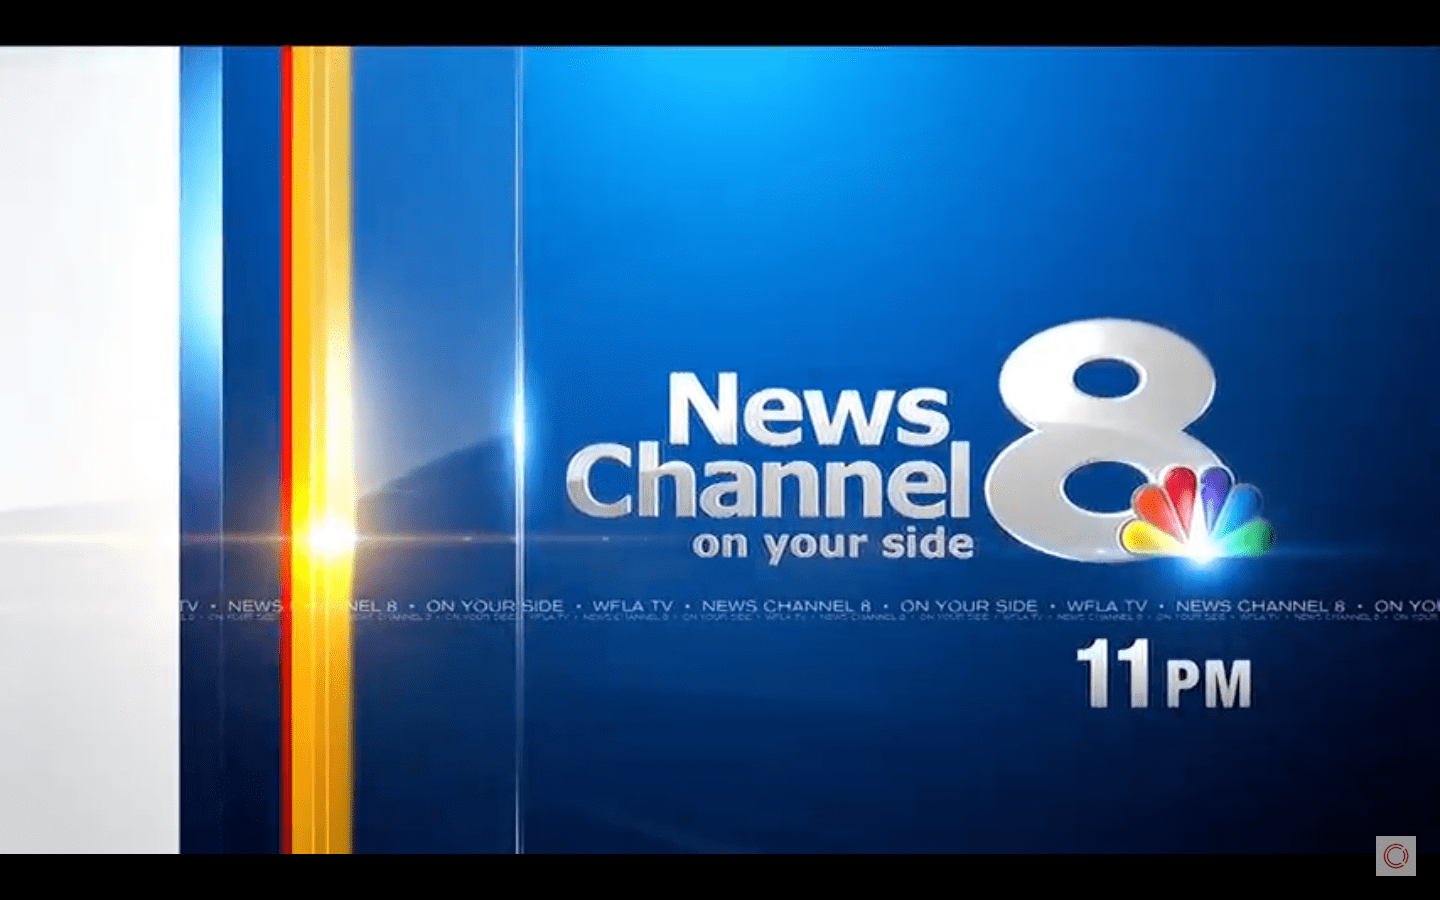 WFLA News Channel 8 – Tampa Bay Laundry Day Story